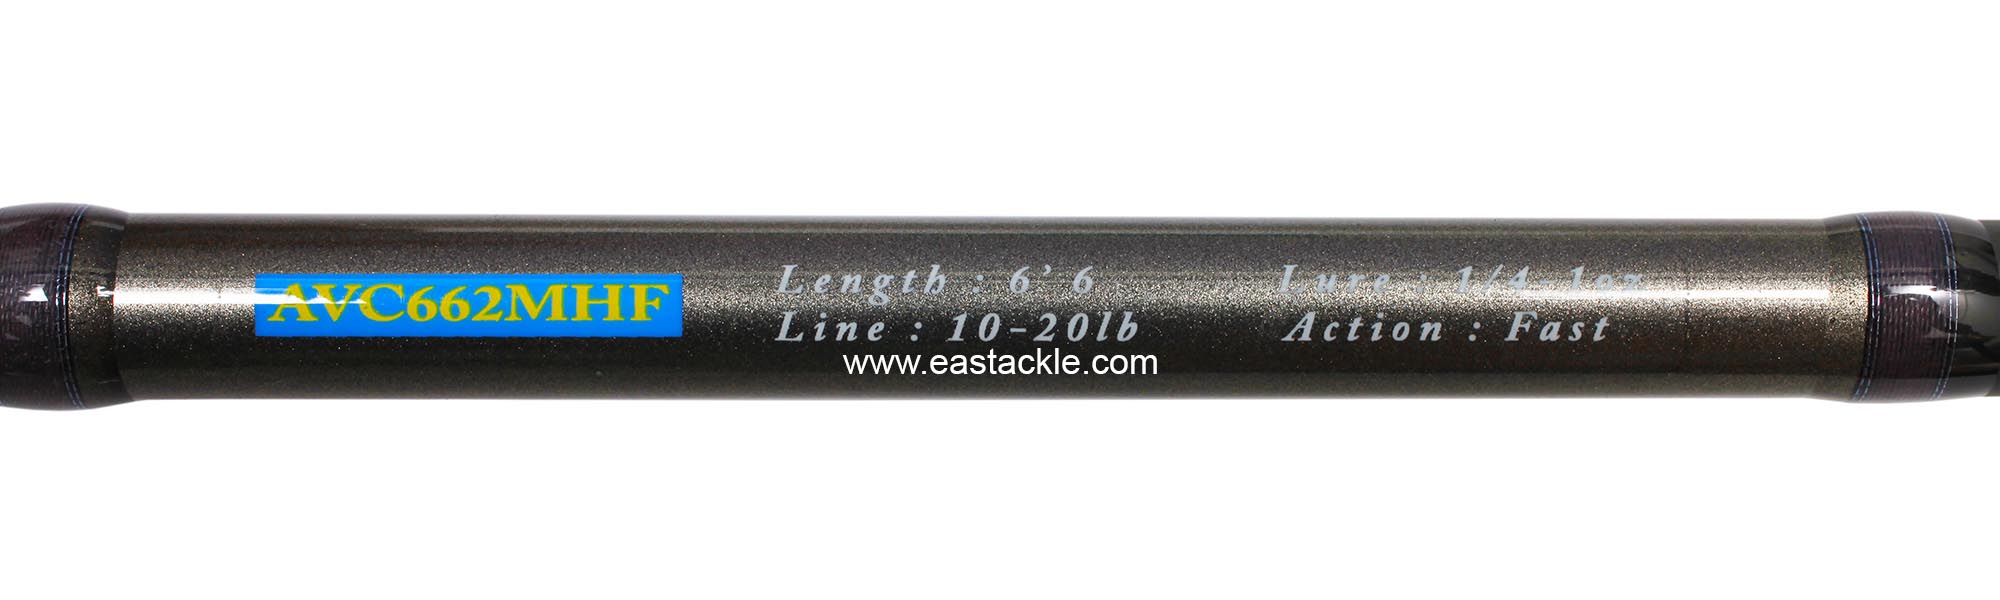 Storm - Adventure - AVC662MHF - Bait Casting Rod - Blank Specifications | Eastackle